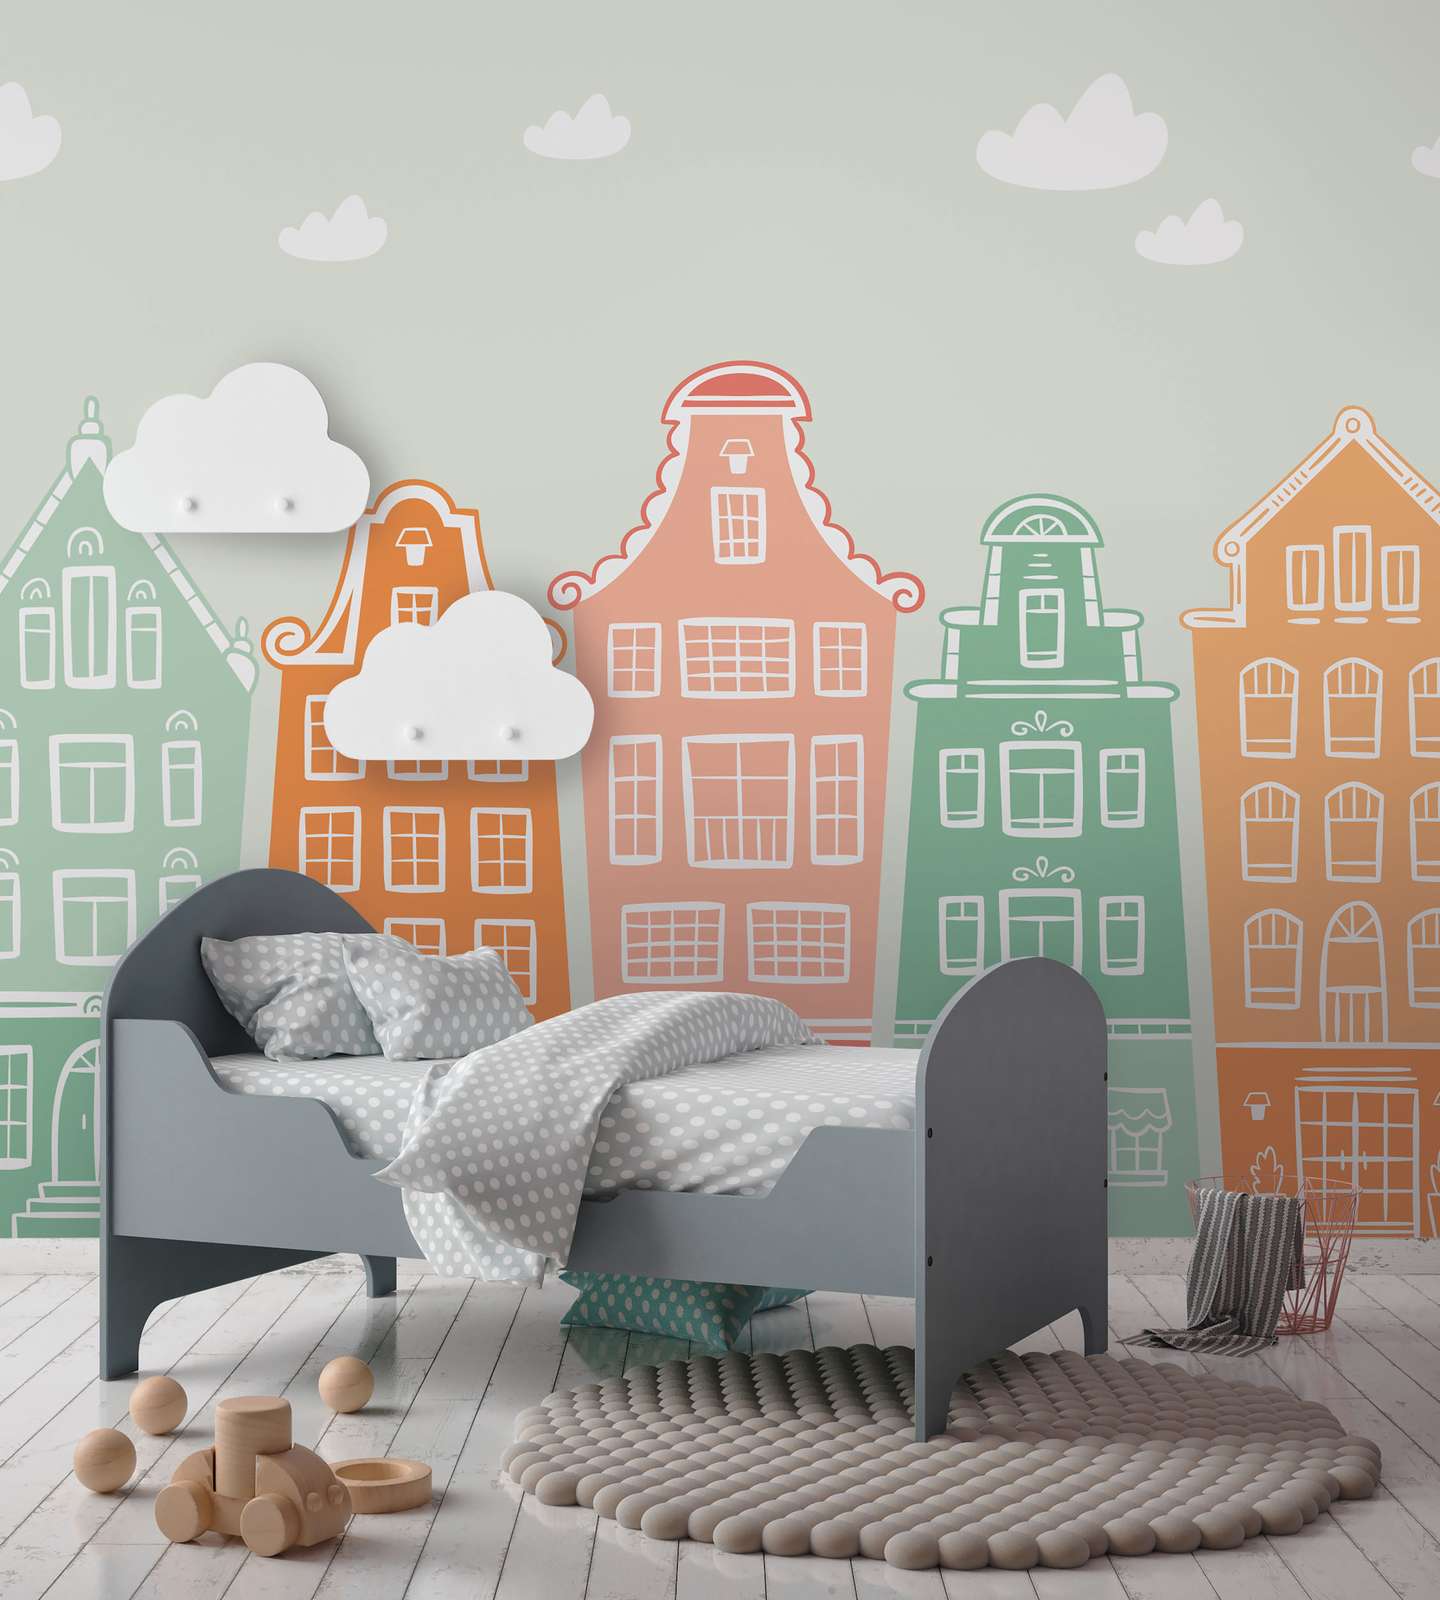             Nursery Small Town with Houses Wallpaper - Pastel, Colourful
        